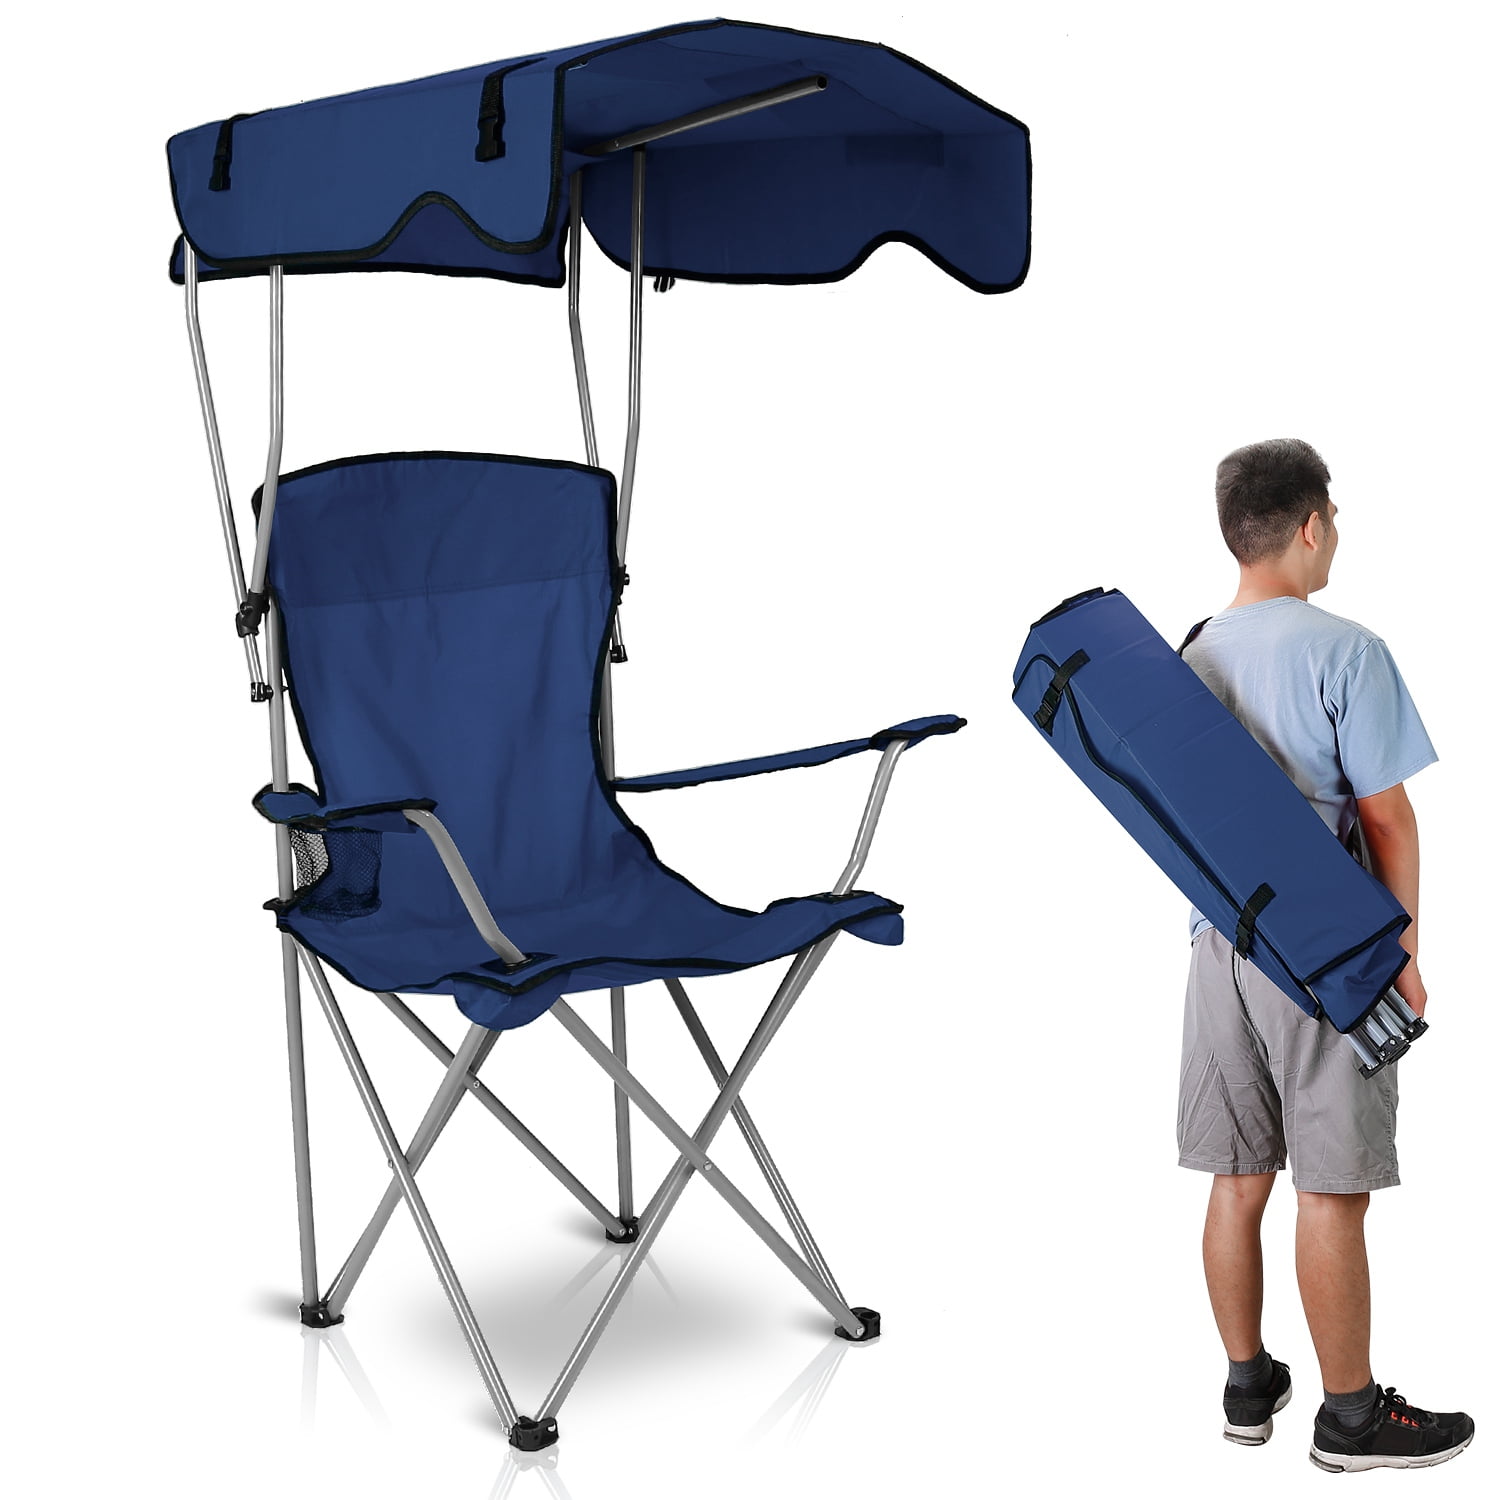 Beach Chair with Canopy Shade, iMountek Folding Canopy Camping Sports  Chair, Blue